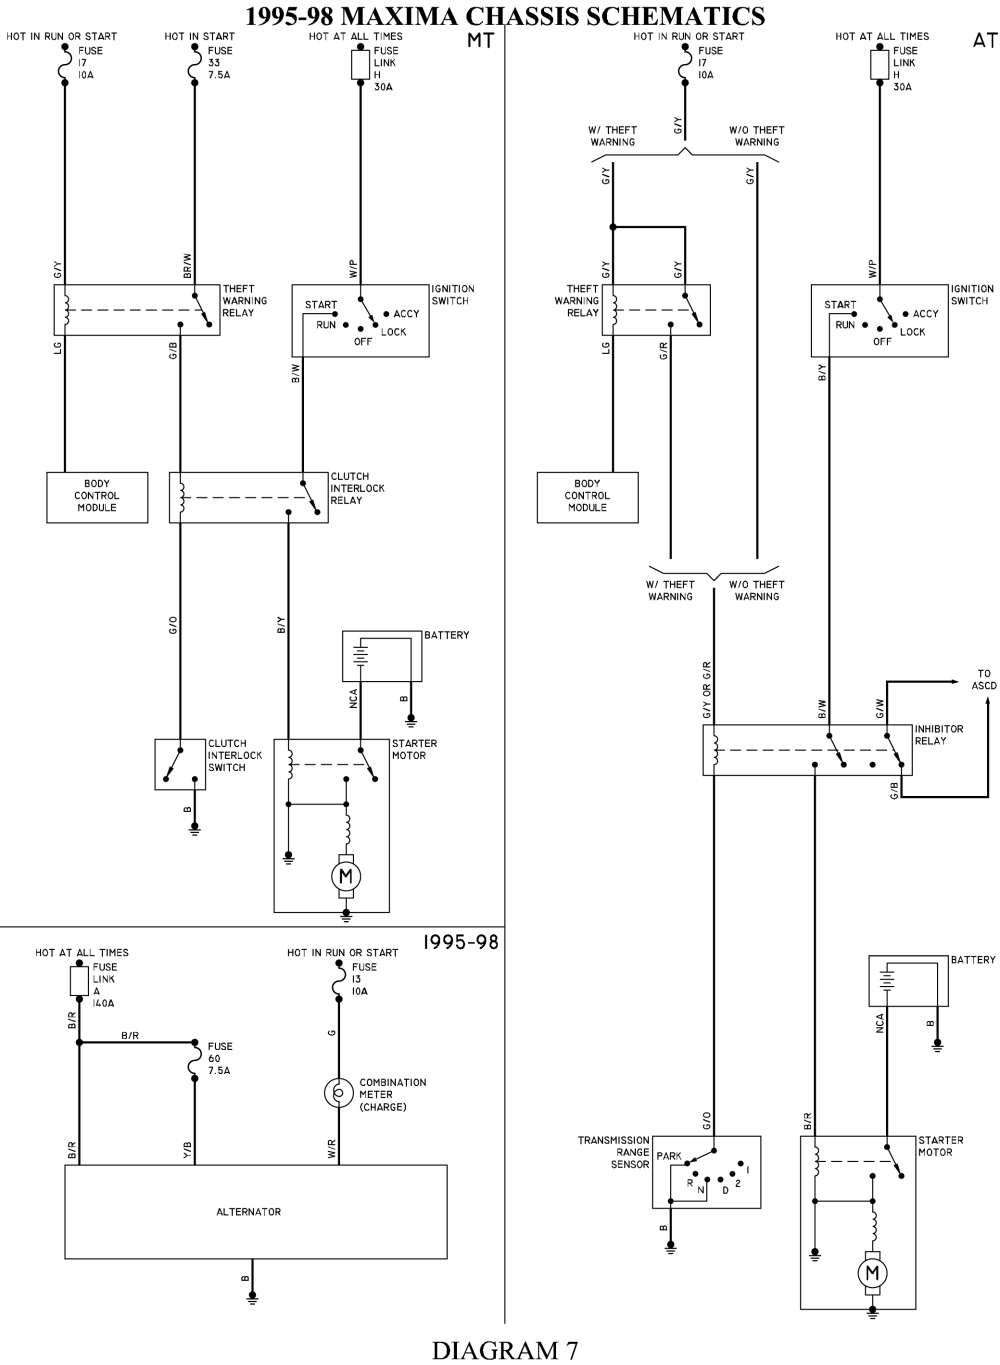 2002 Nissan Altima Car Stereo Radio Wiring Diagram from econtent.autozone.com